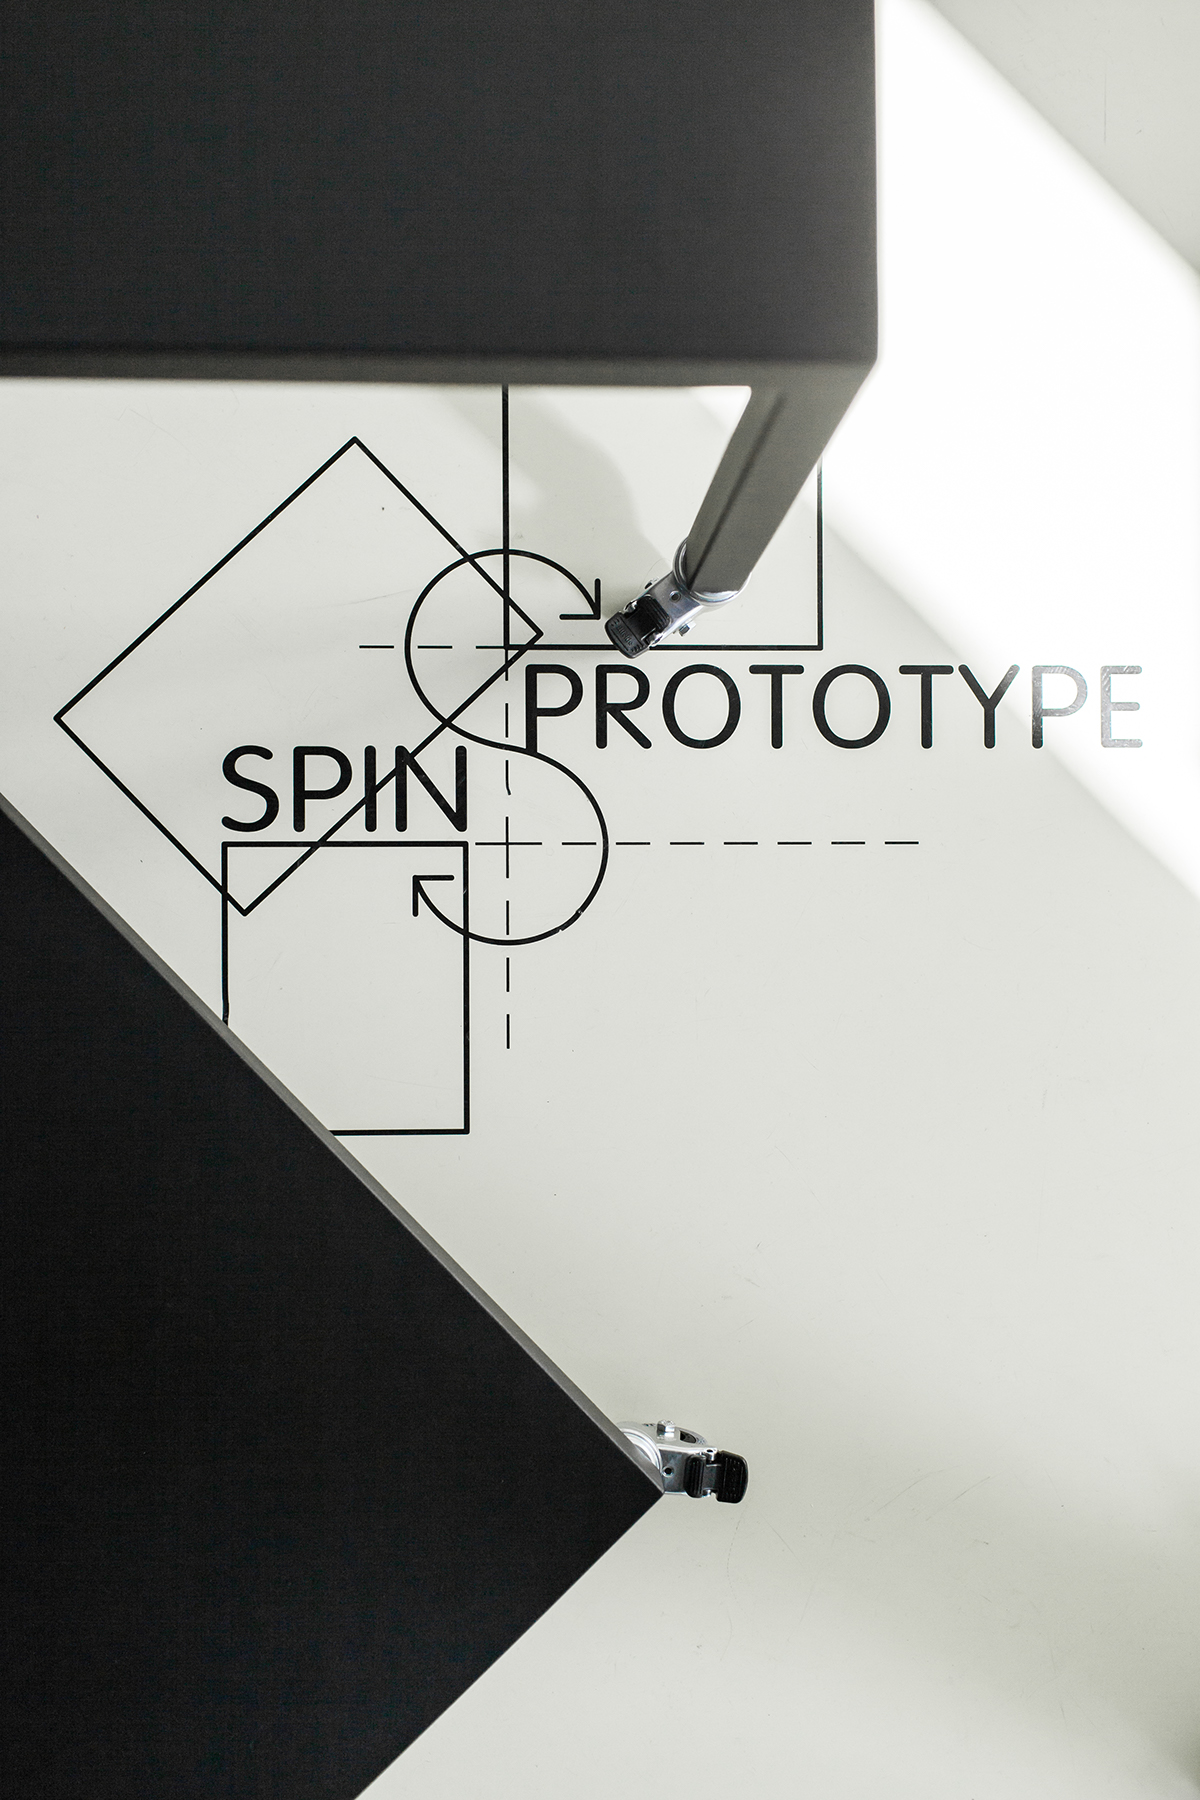 spin table object design prototype